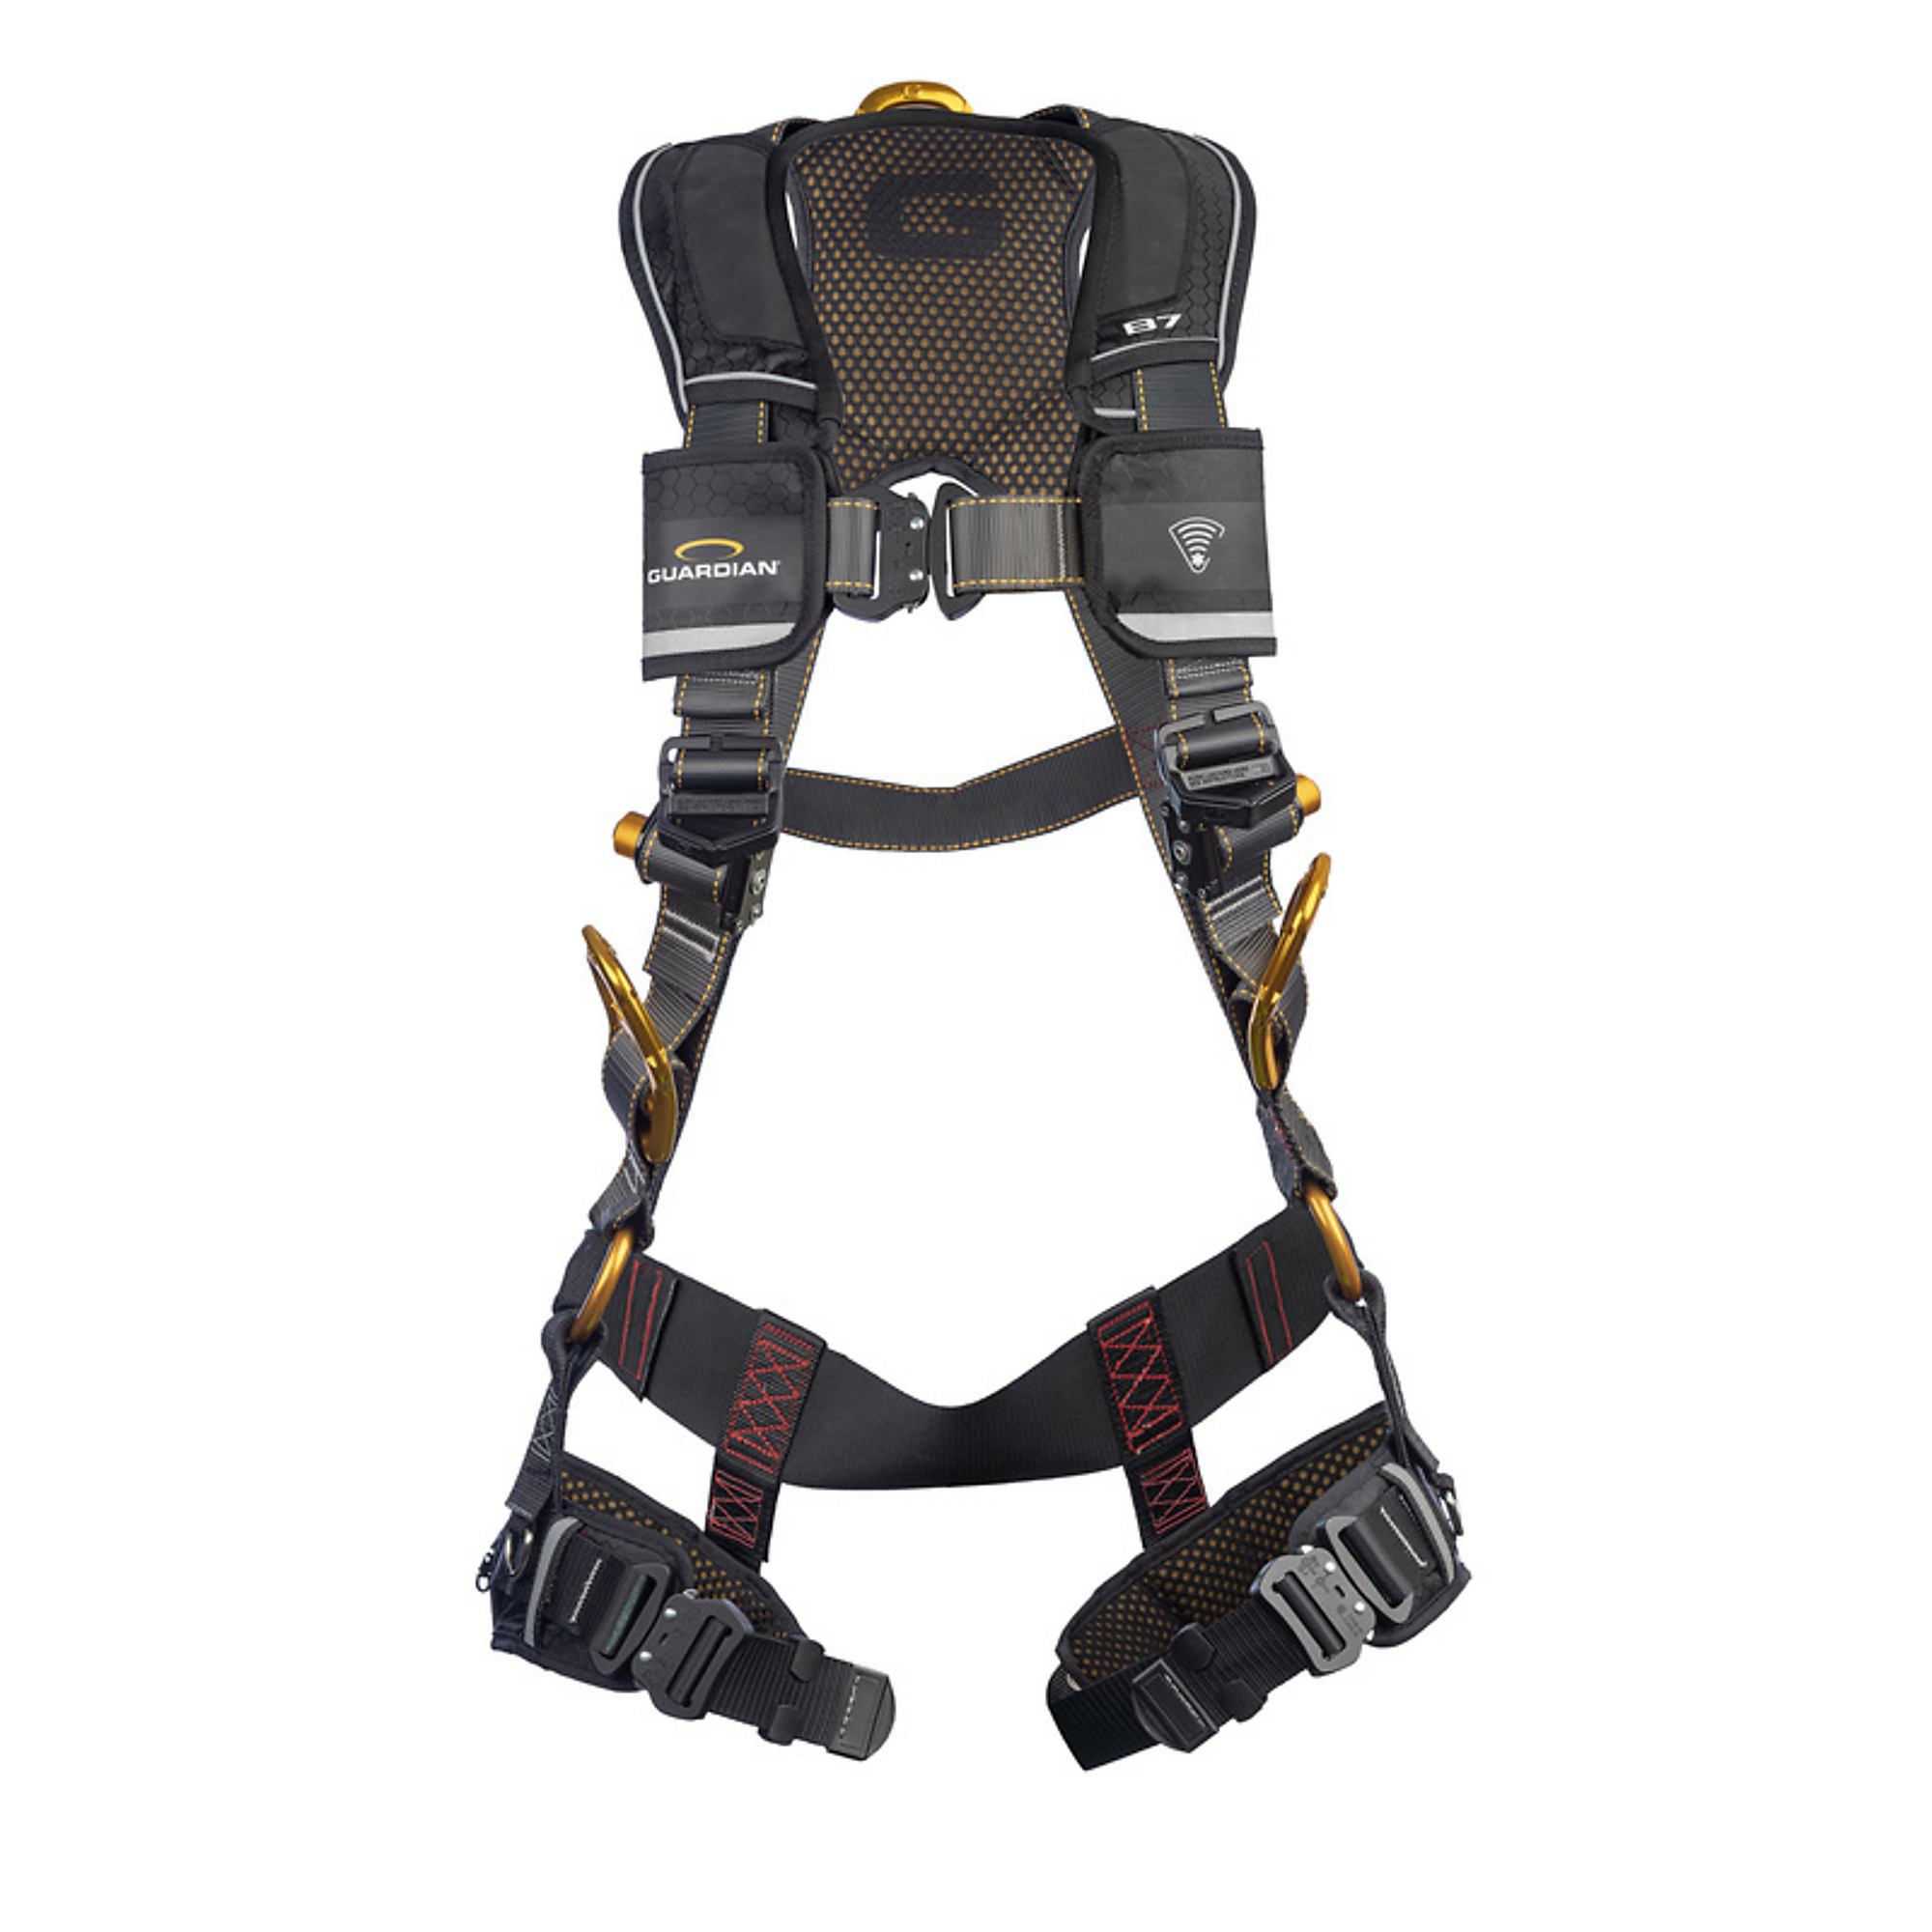 Guardian, B7 Harness, S, Hip D-Ring, QC Chest/QC Leg, Weight Capacity 420 lb, Harness Size S, Model 3740037